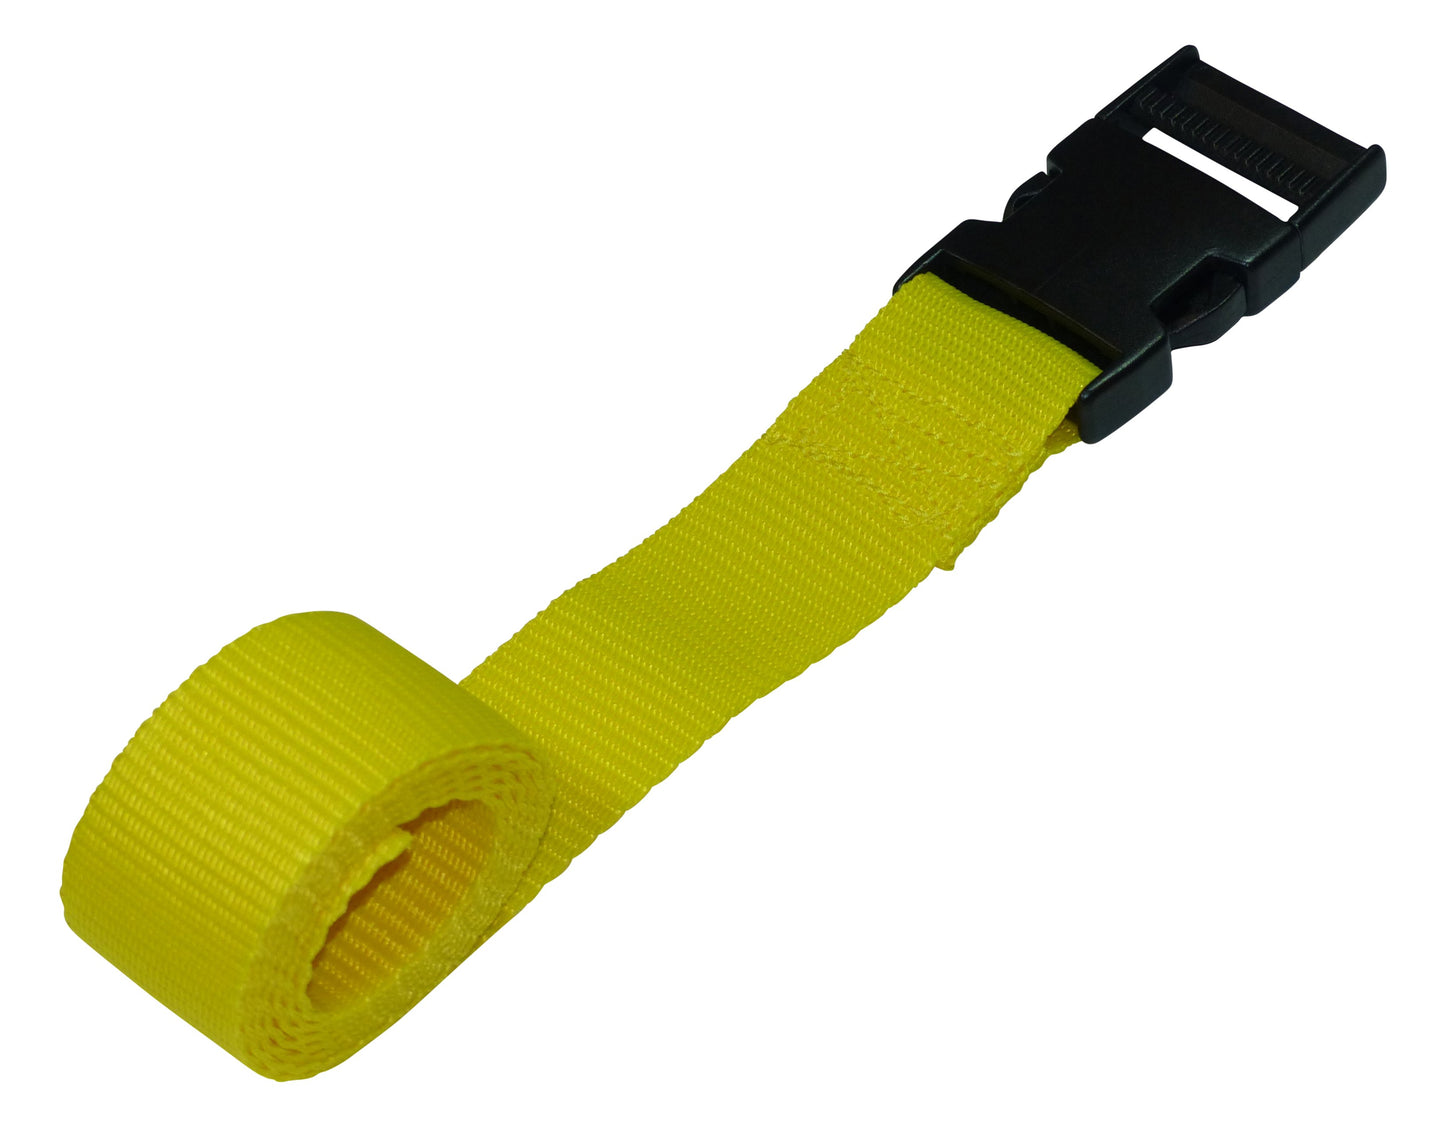 38mm Webbing Strap with Quick Release Buckle